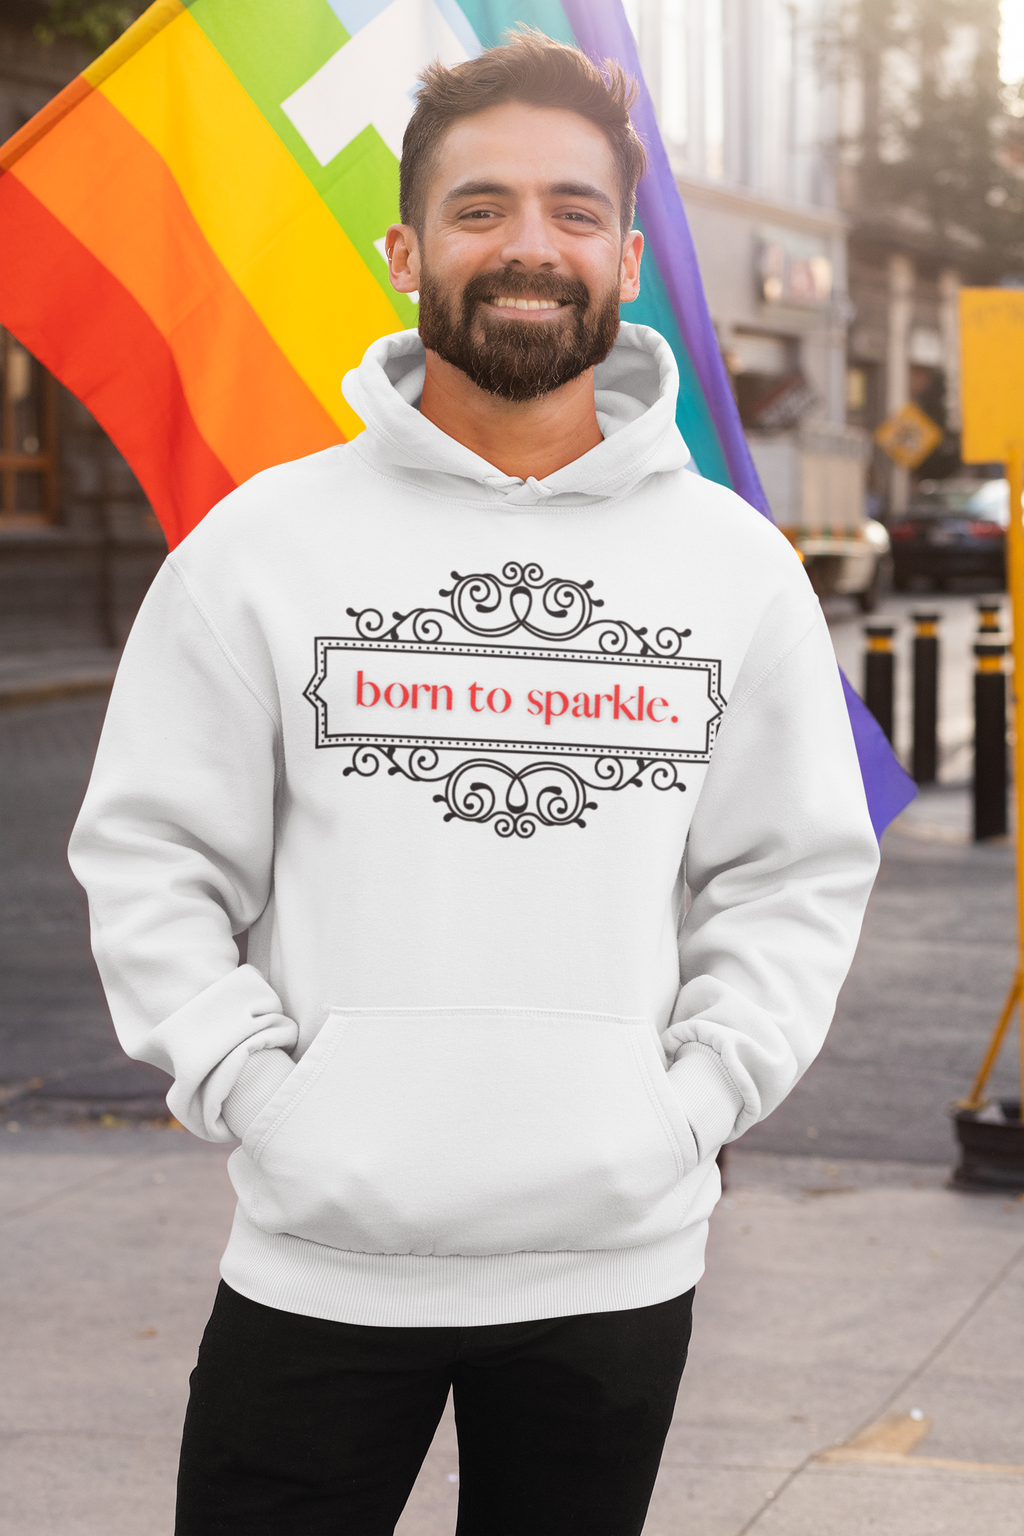 Born To Sparkle Unisex Hooded Sweatshirt, Classic Fit, Gift Item - Cheers Together Gift House